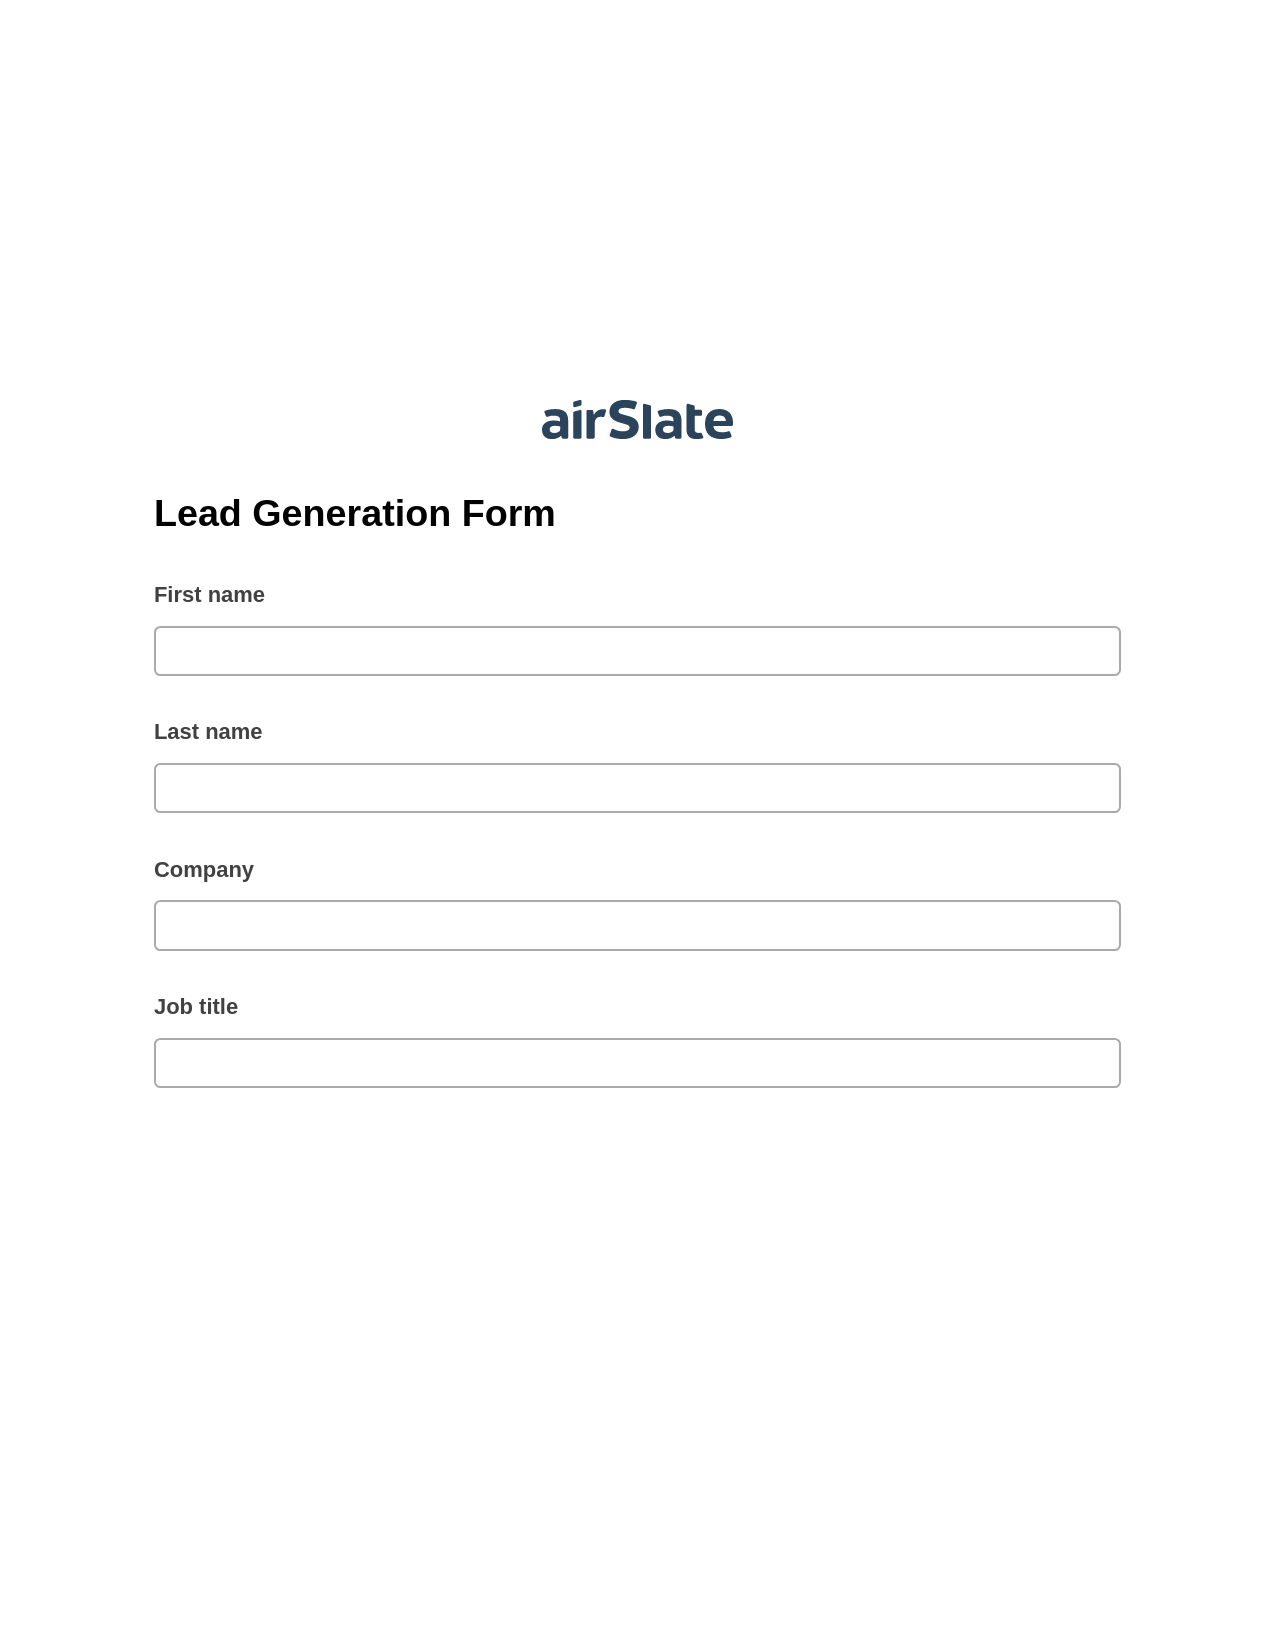 Lead Generation Form Pre-fill Dropdowns from Airtable, Hide Signatures Bot, Post-finish Document Bot